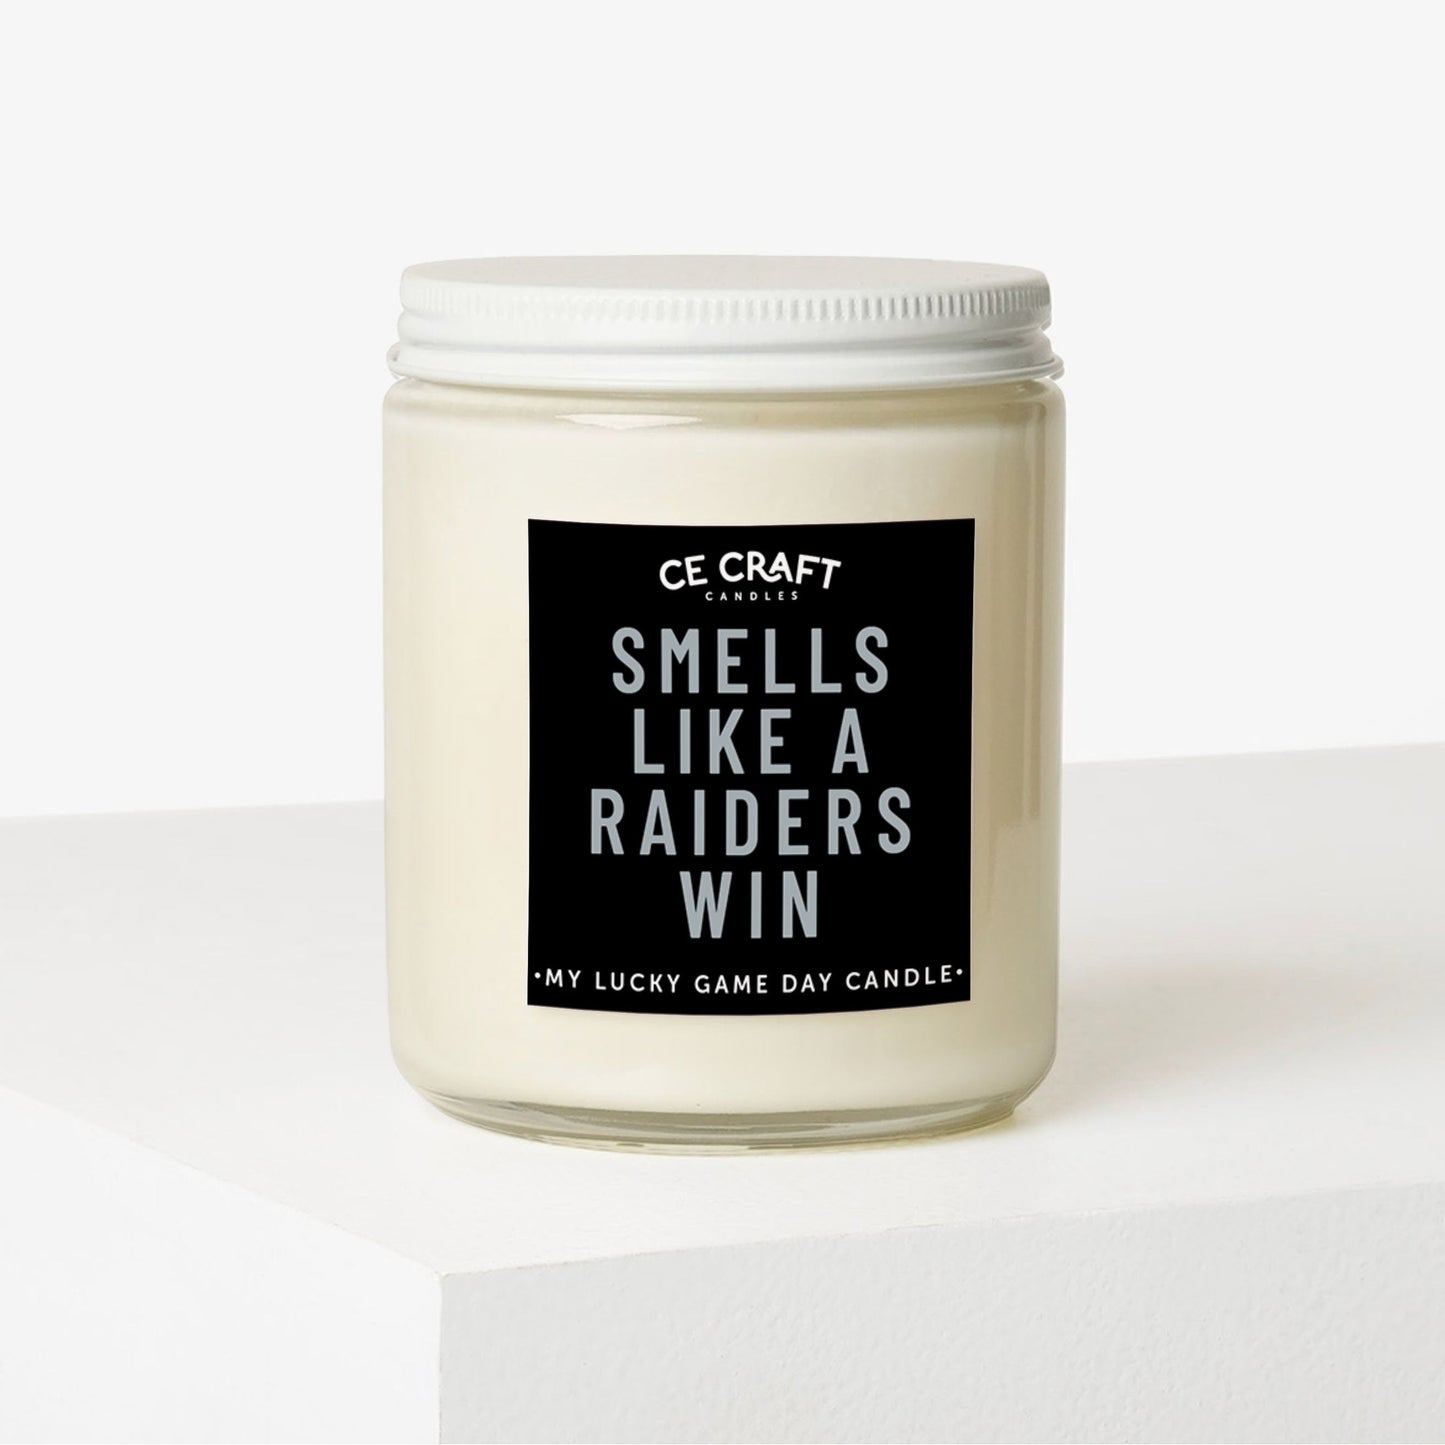 Smells Like a Raiders Win Scented Candle C & E Craft Co 